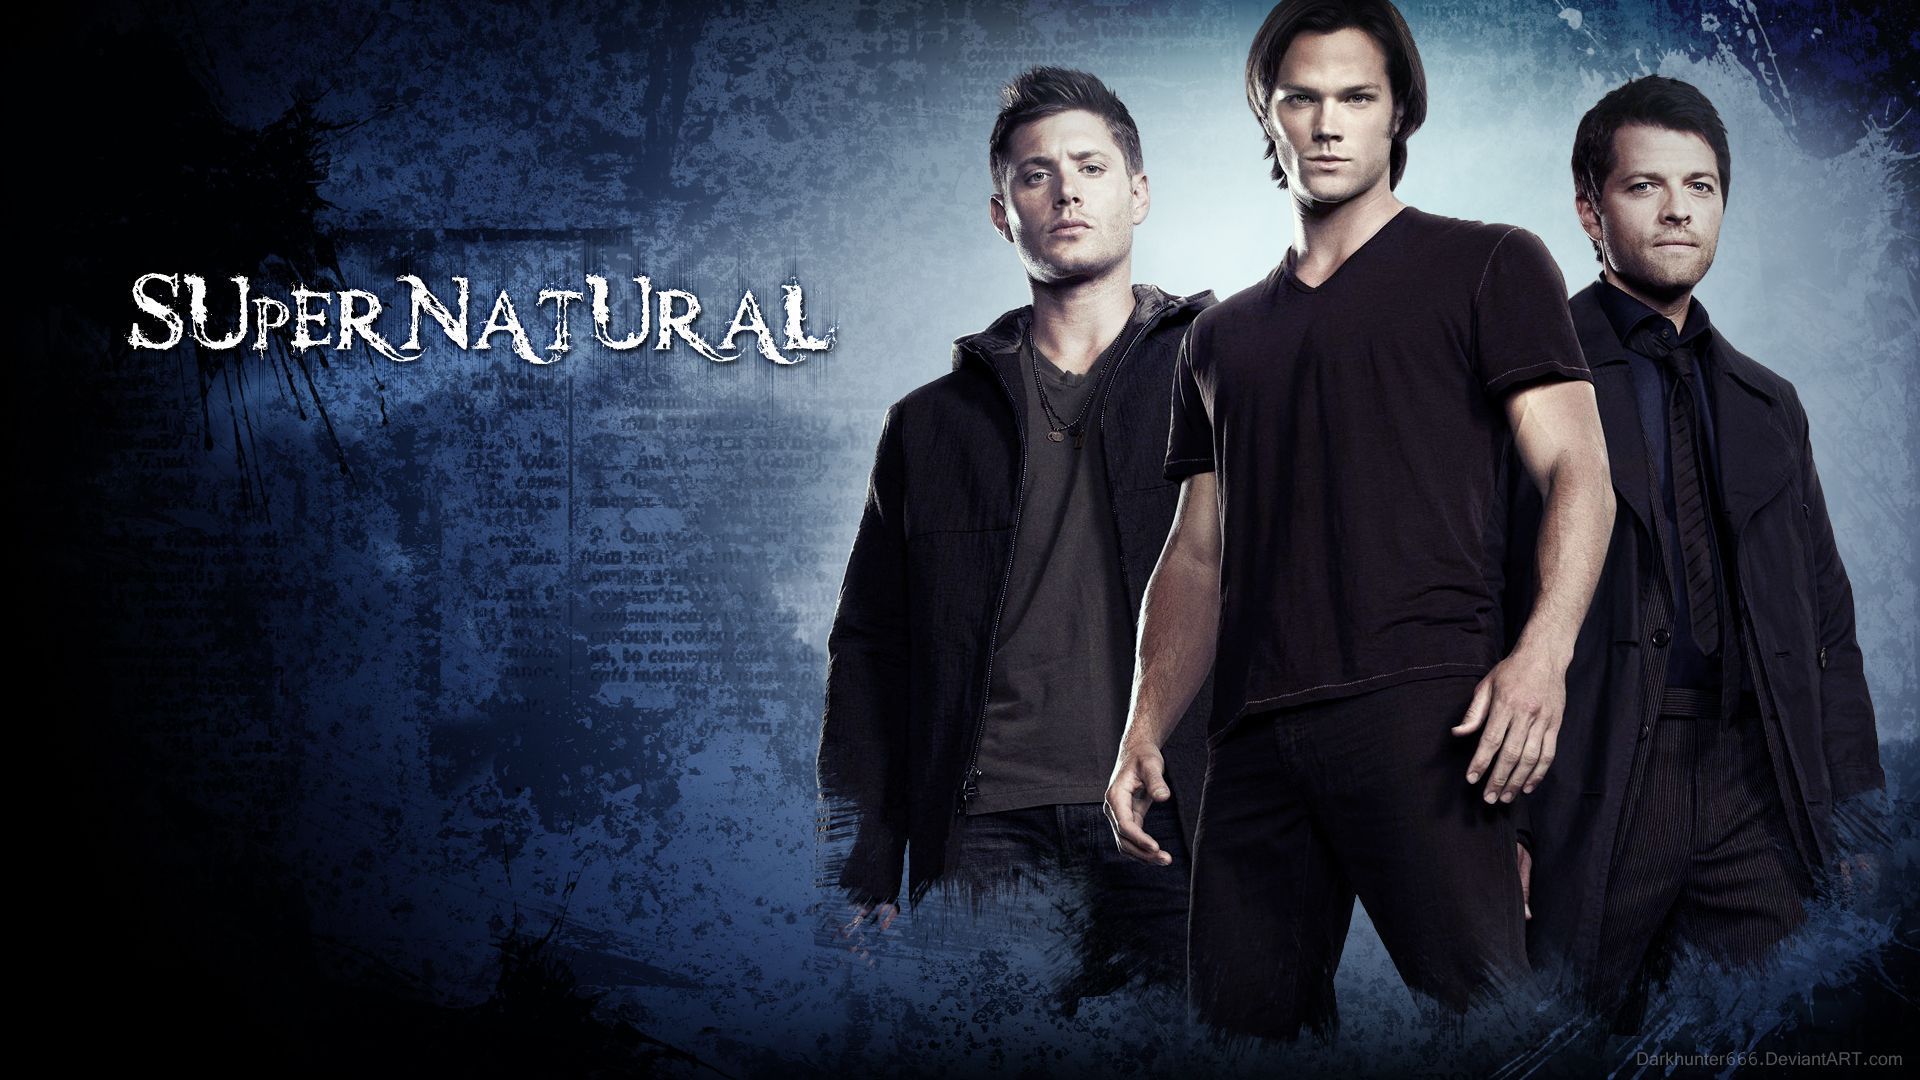 Supernatural Wallpapers High Resolution and Quality Download